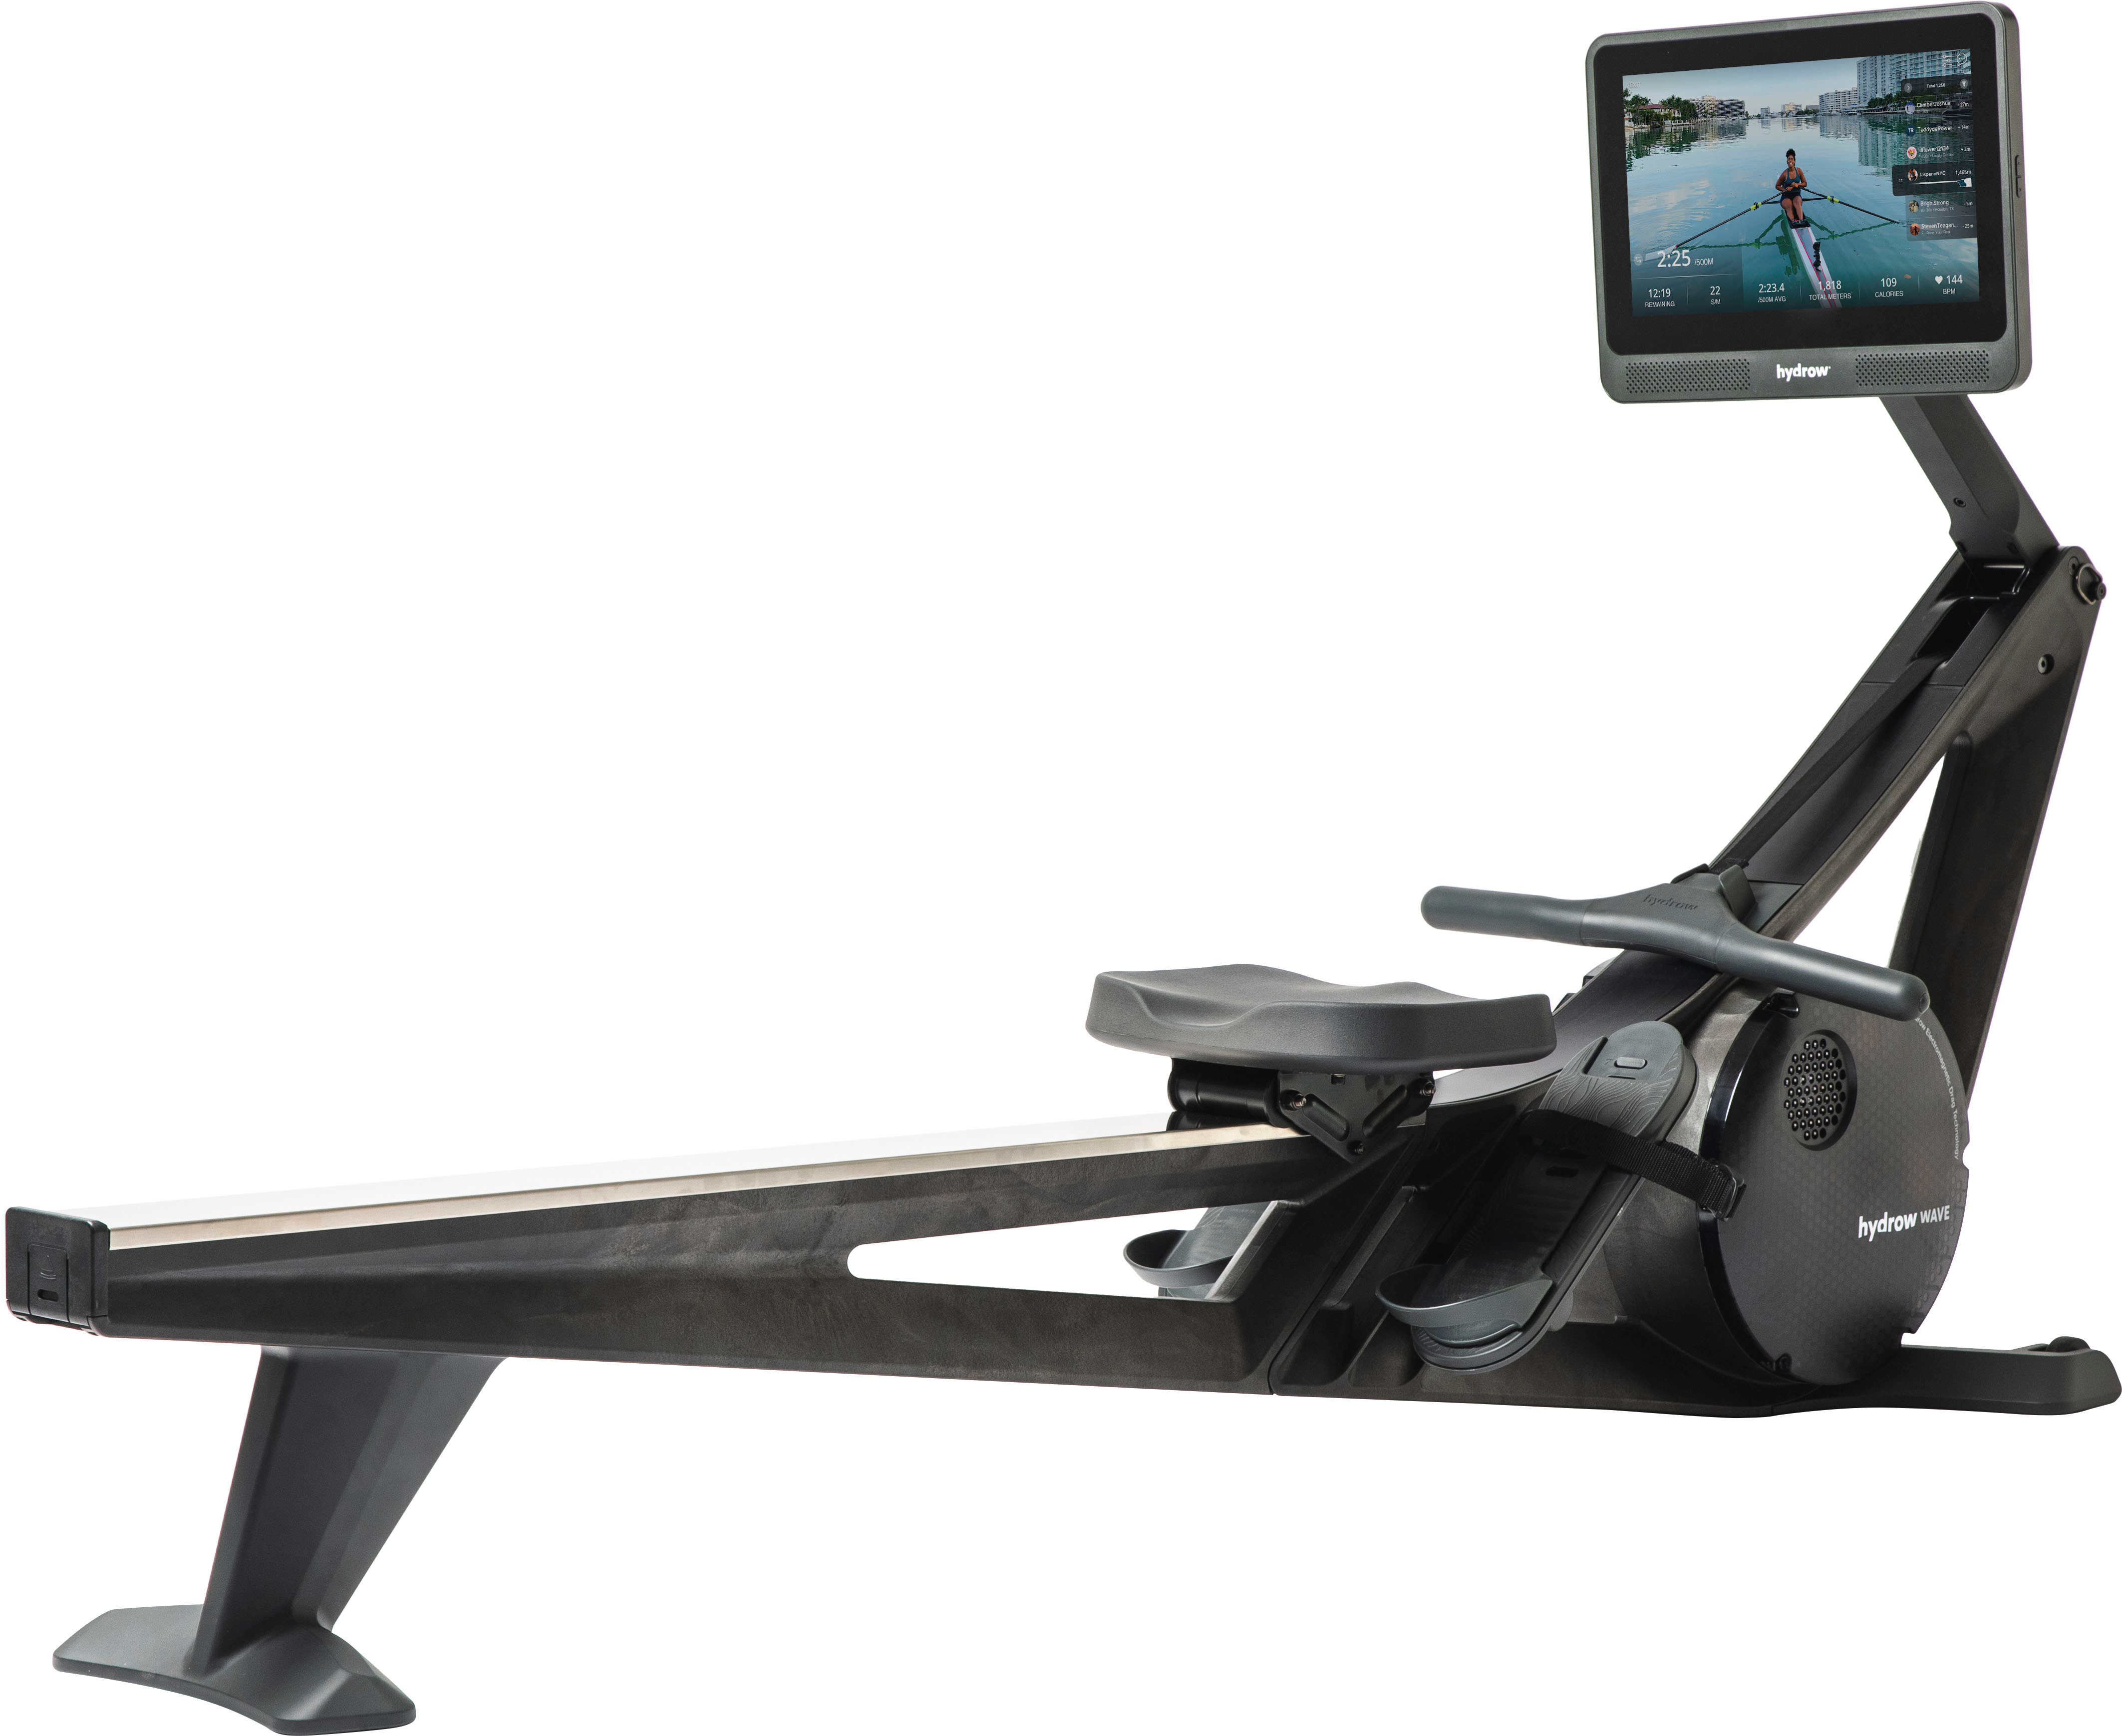 Hydrow Wave Review: The best rowing machine we've used - Reviewed